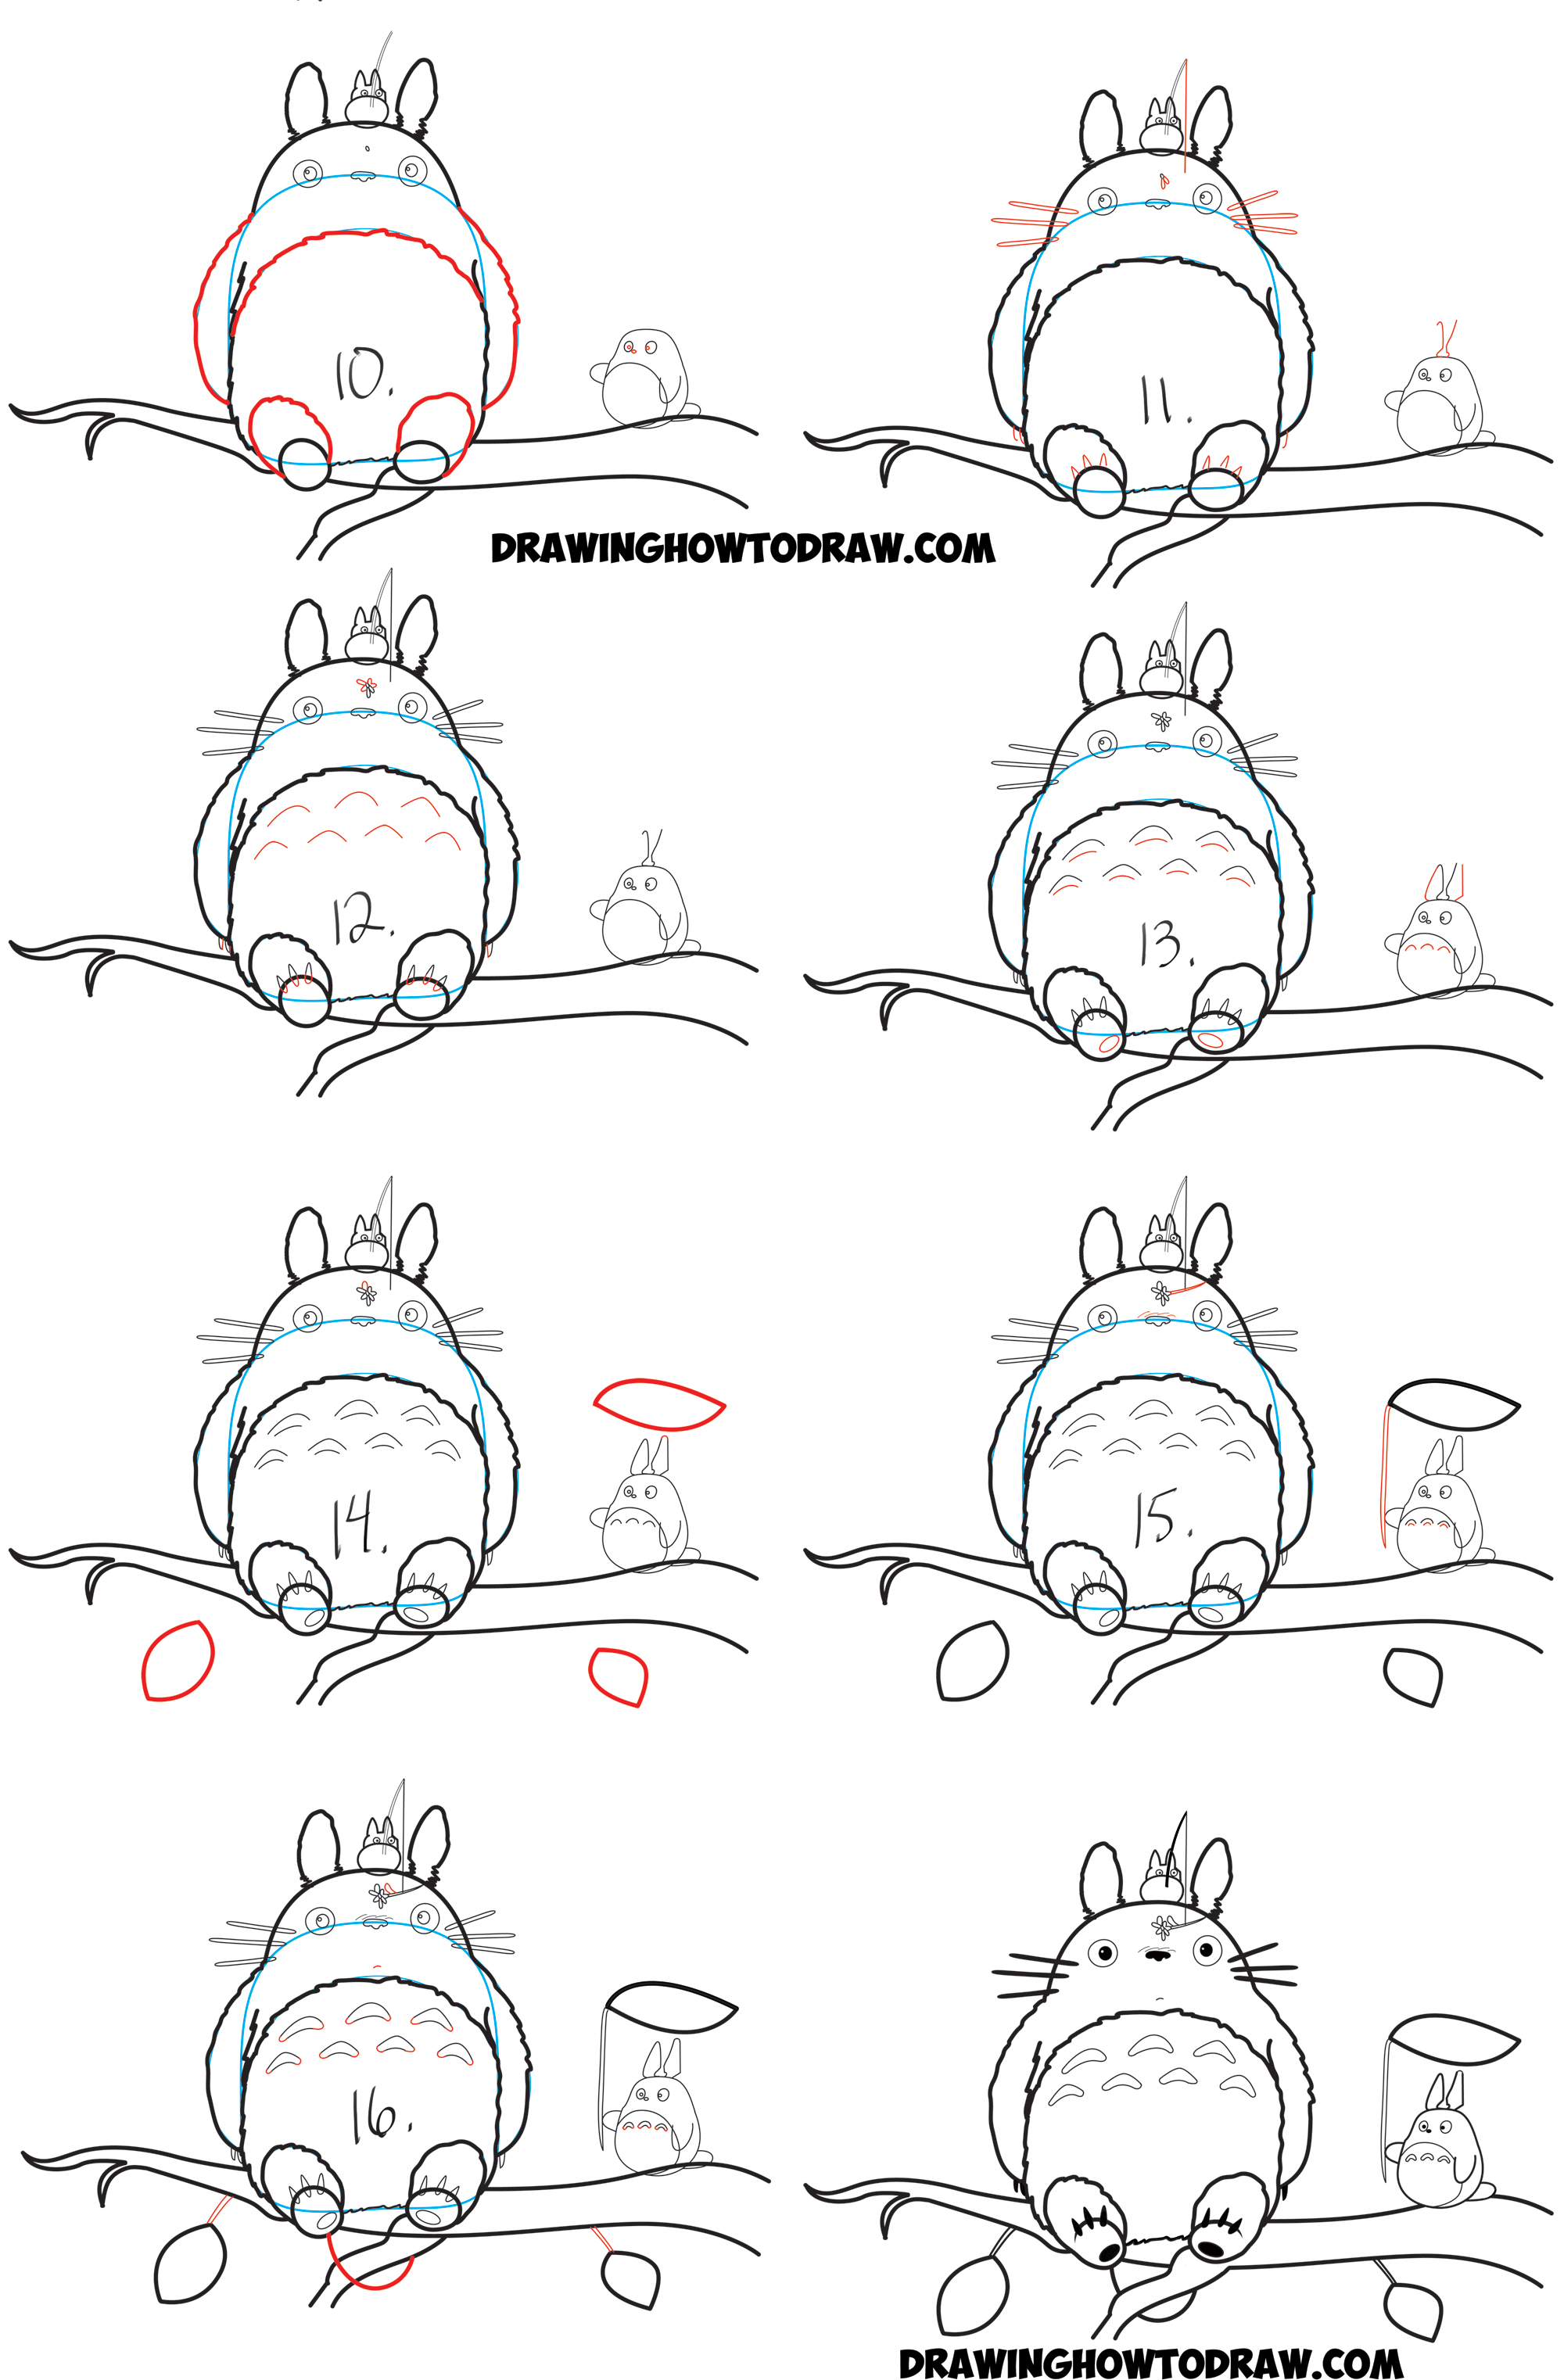 How to Draw Totoro from My Neighbor Totoro - Easy Step by Step Drawing ...